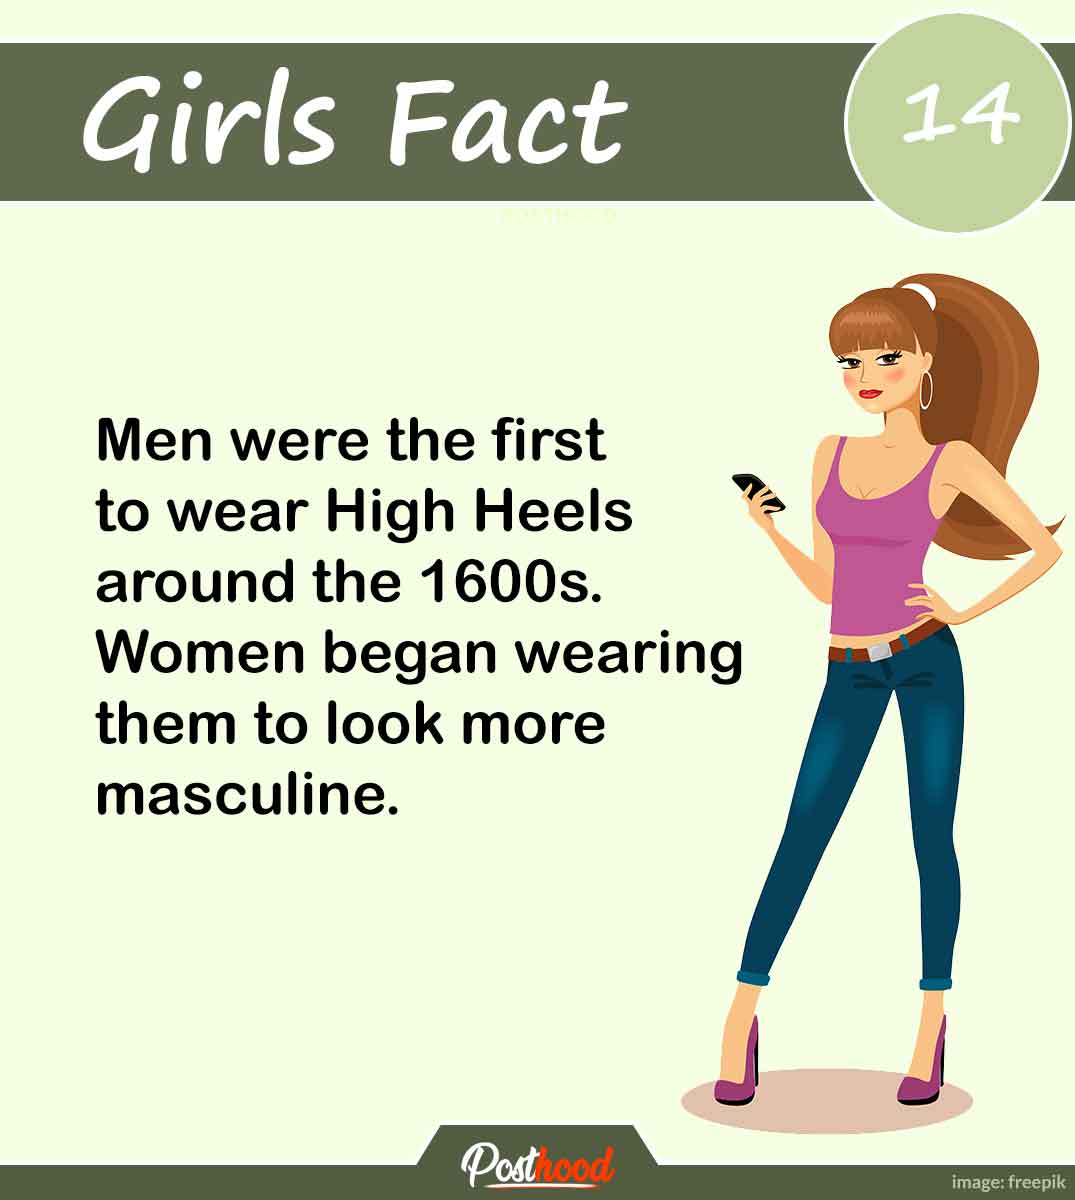 Will you wonder if we say that high heels were the fashion for men. Yes! Girls are so good at copying. Know the other interesting facts about girls that will blow your mind.